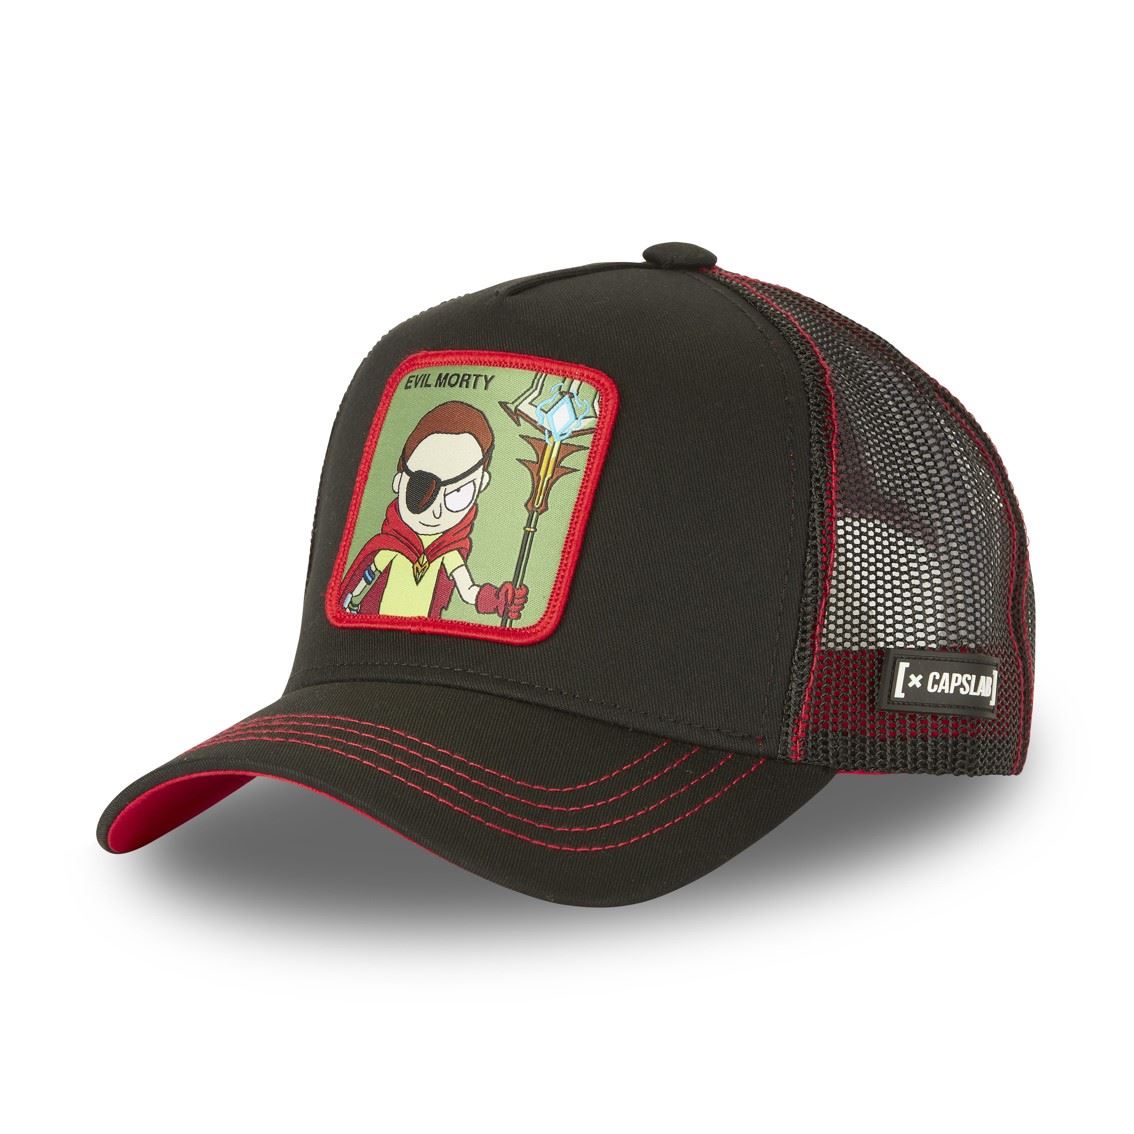 Rick and Morty Evil morty Black Red Trucker Cap Capslab